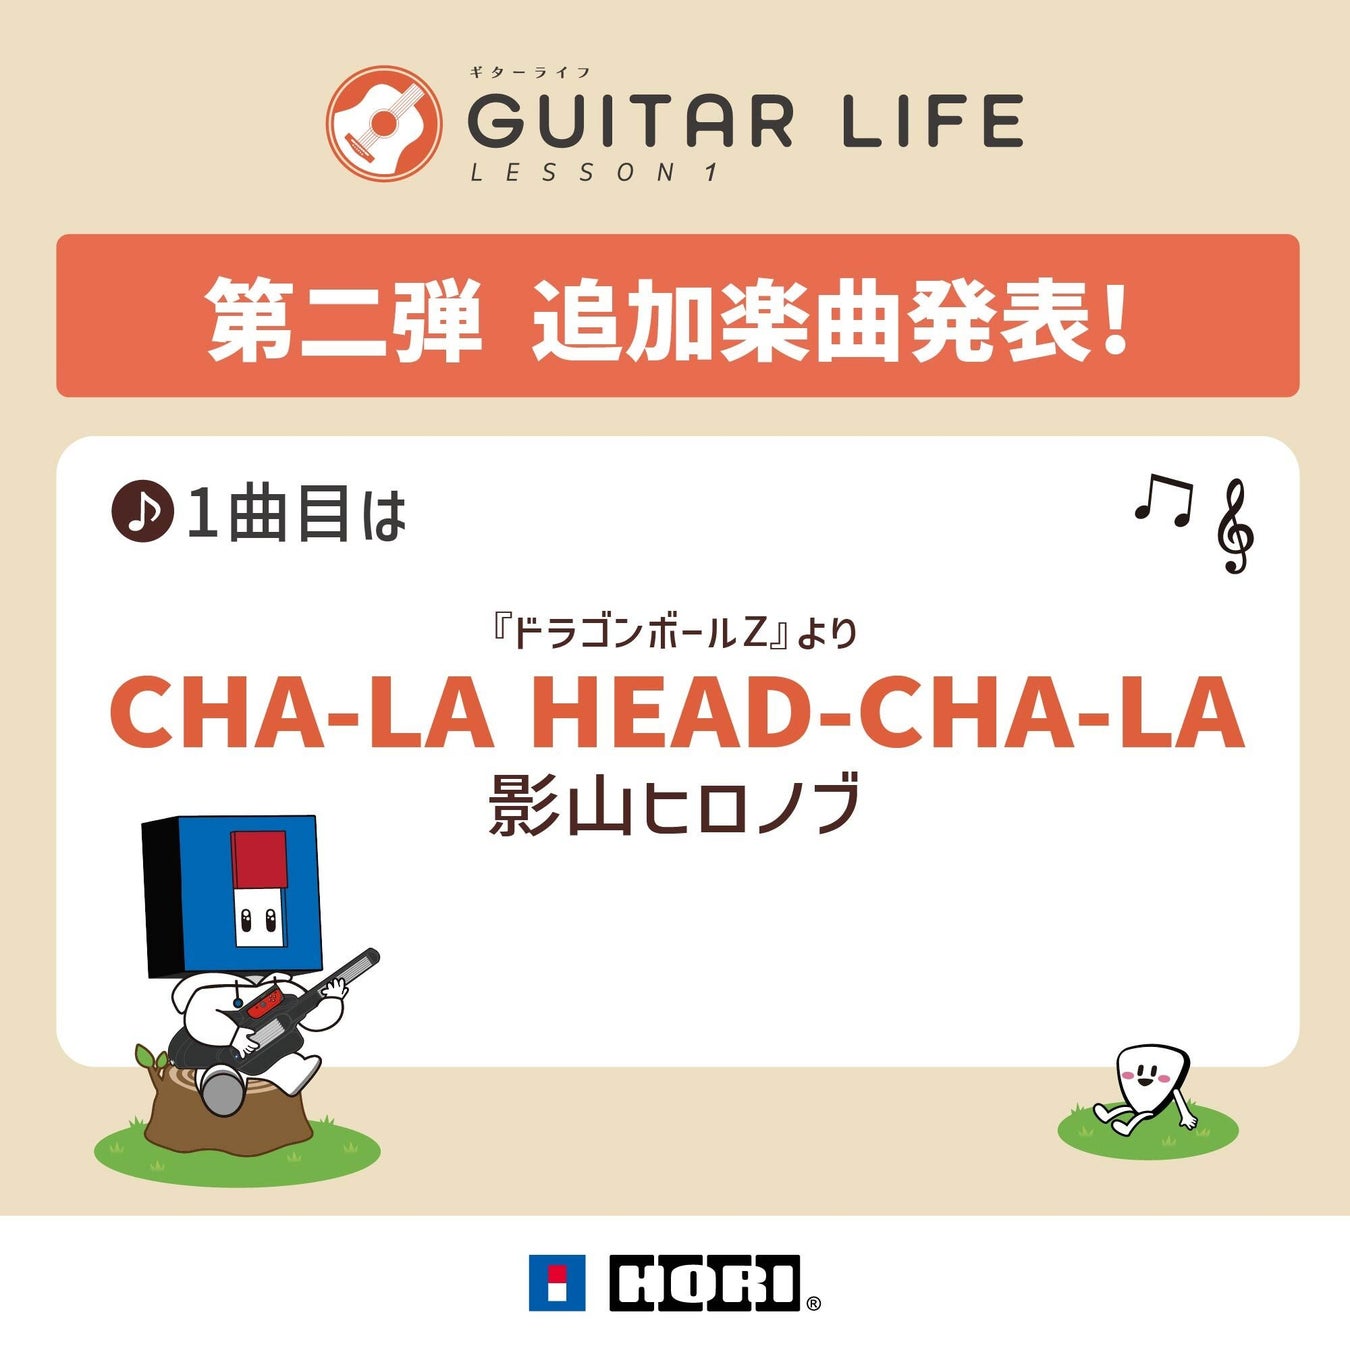 Nintendo Switch専用ソフト「GUITAR LIFE -LESSON1-」追加楽曲パック第二弾、2024年8月より配信開始予定！！